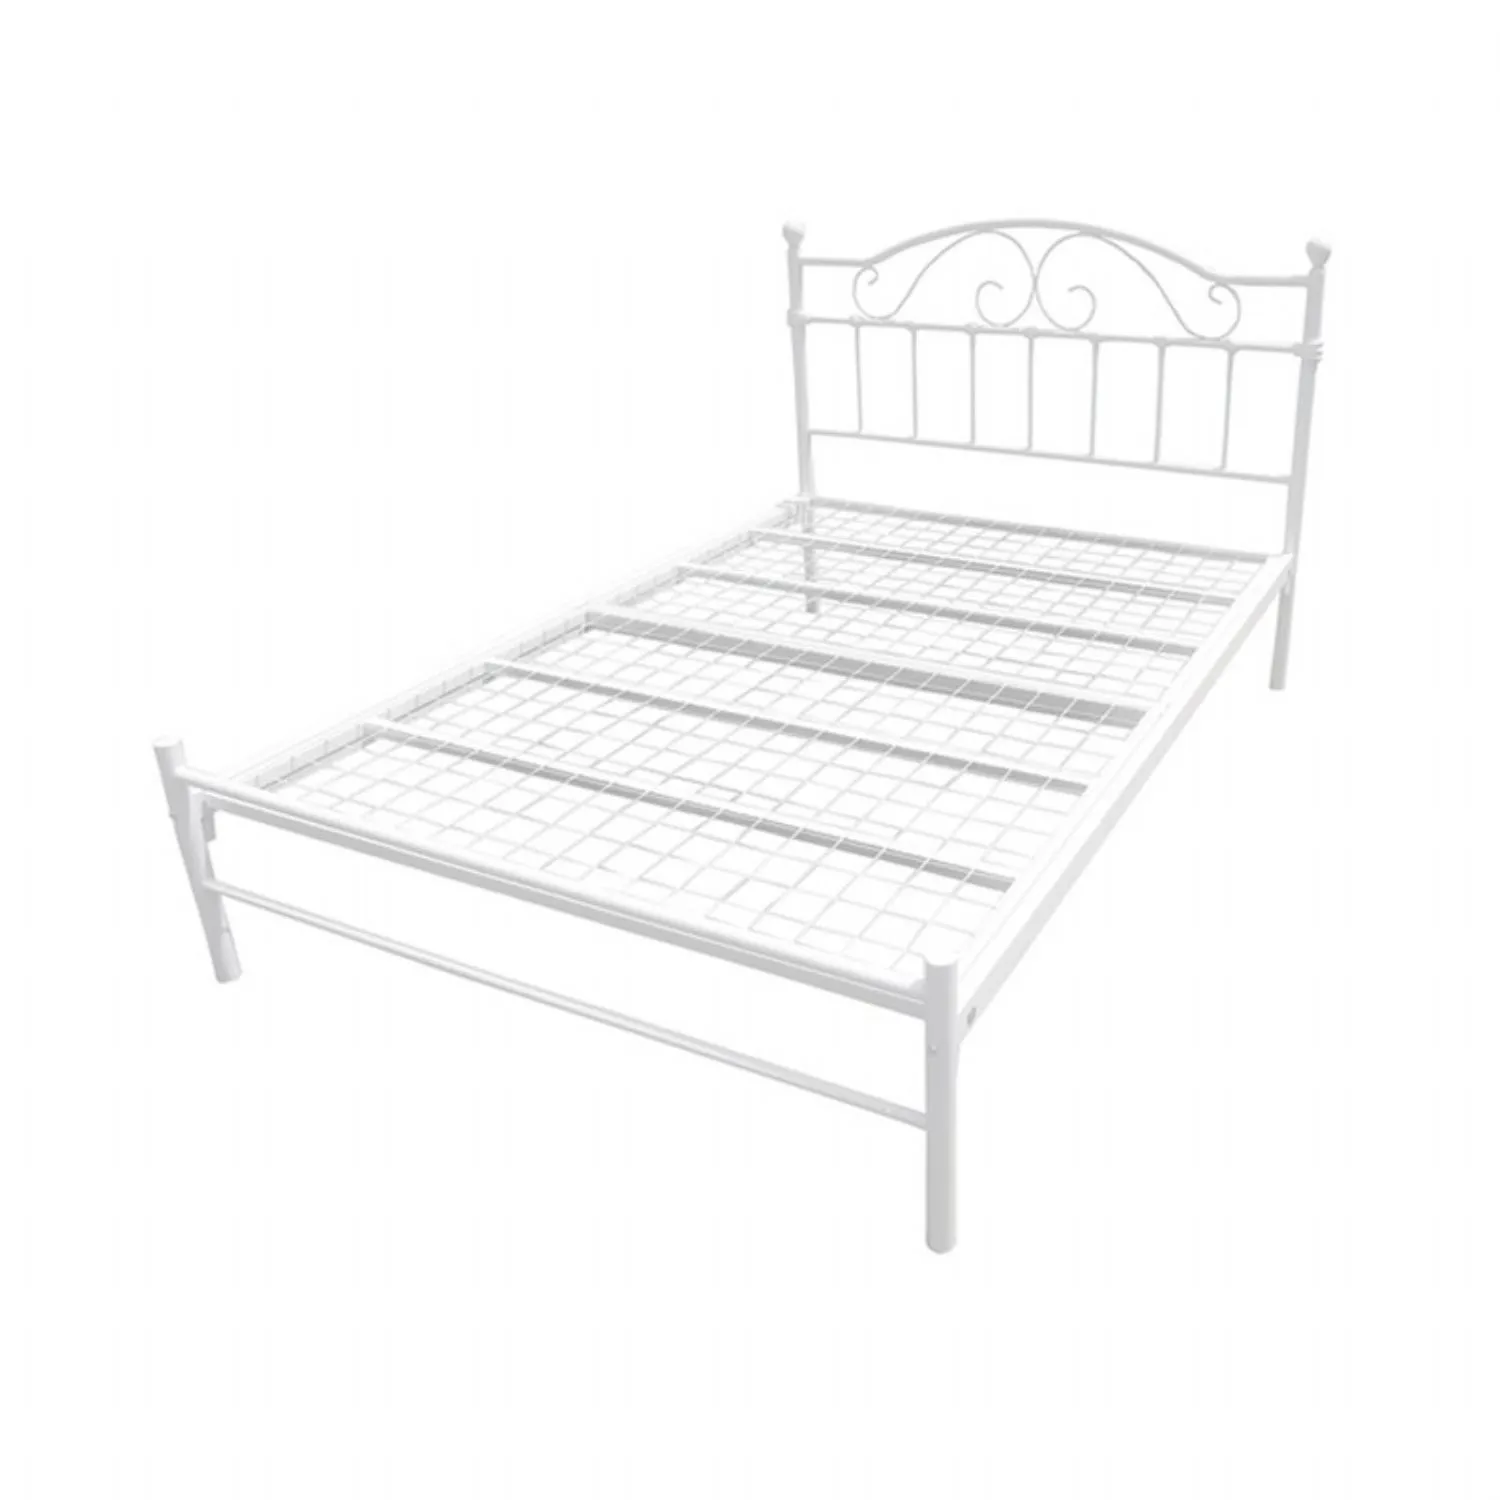 White Metal Bed Mesh Based Contract 3ft